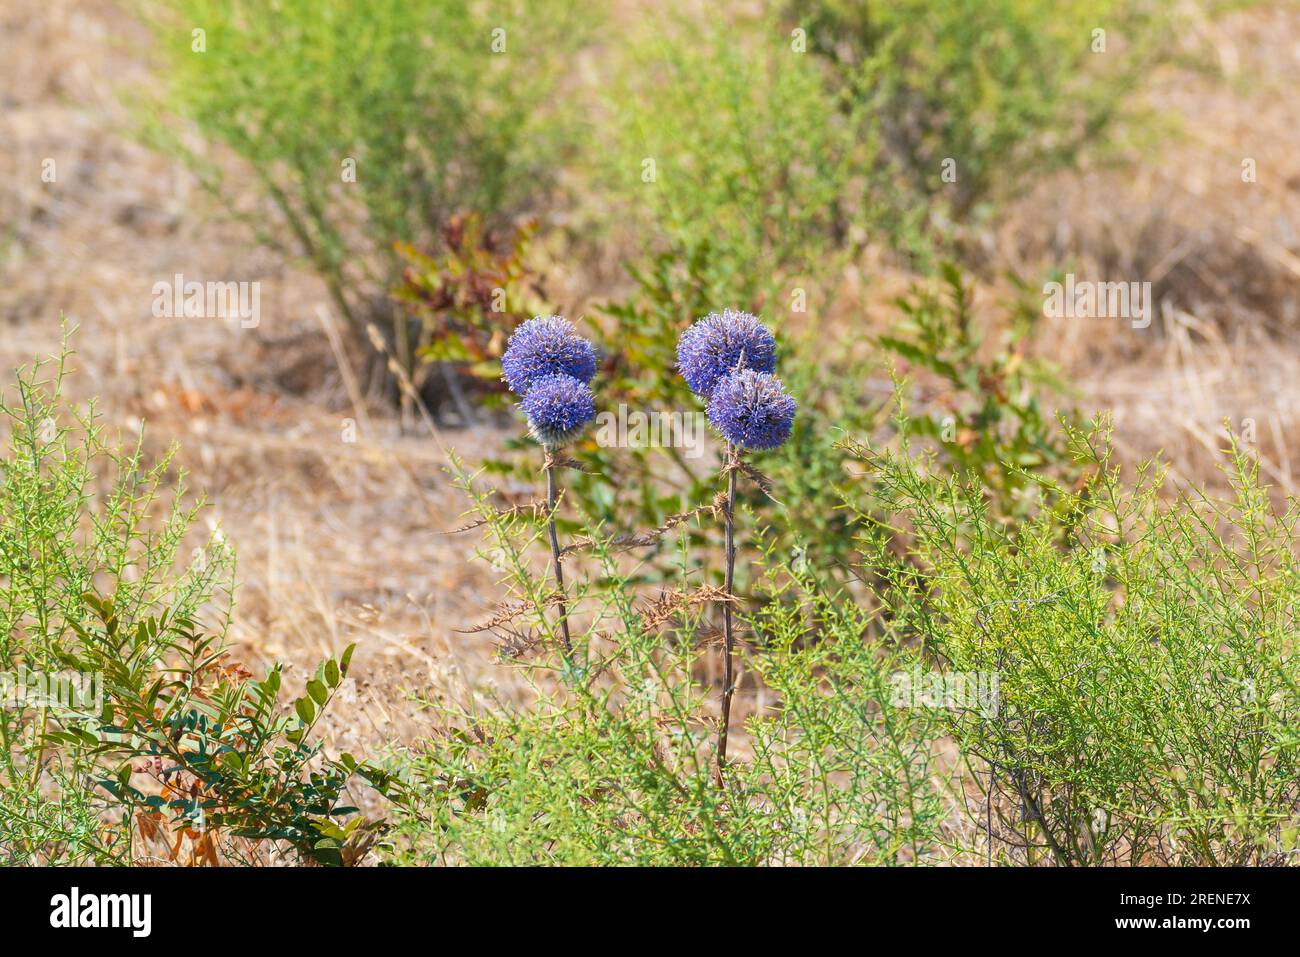 Echinops ritro or violet globe thistle flowering in field Stock Photo